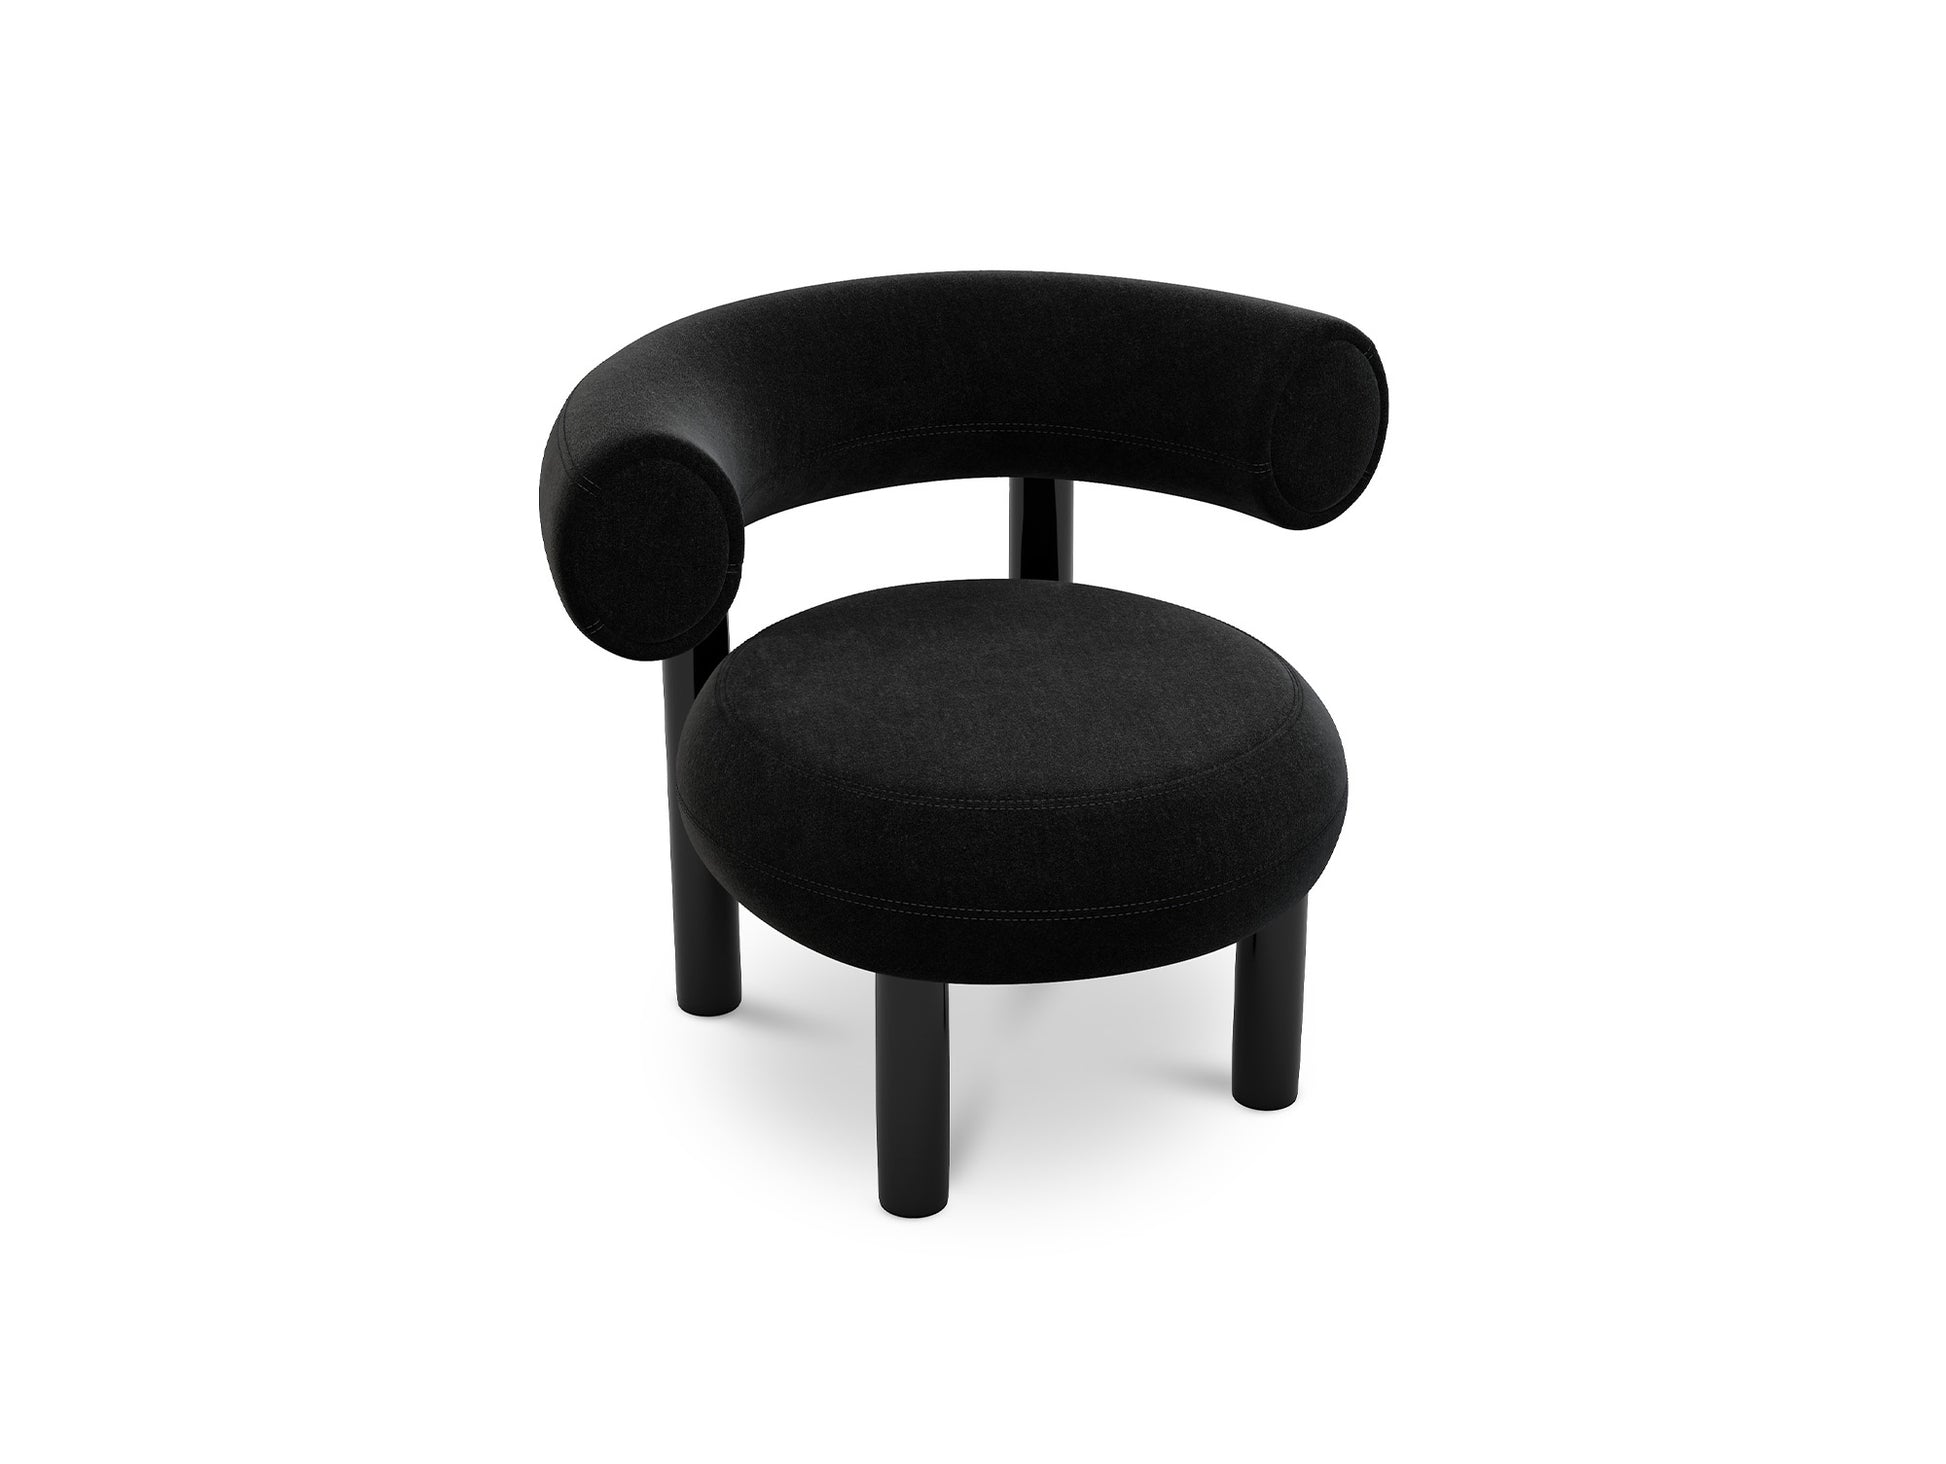 Fat Lounge Chair by Tom Dixon - Gentle 2 193